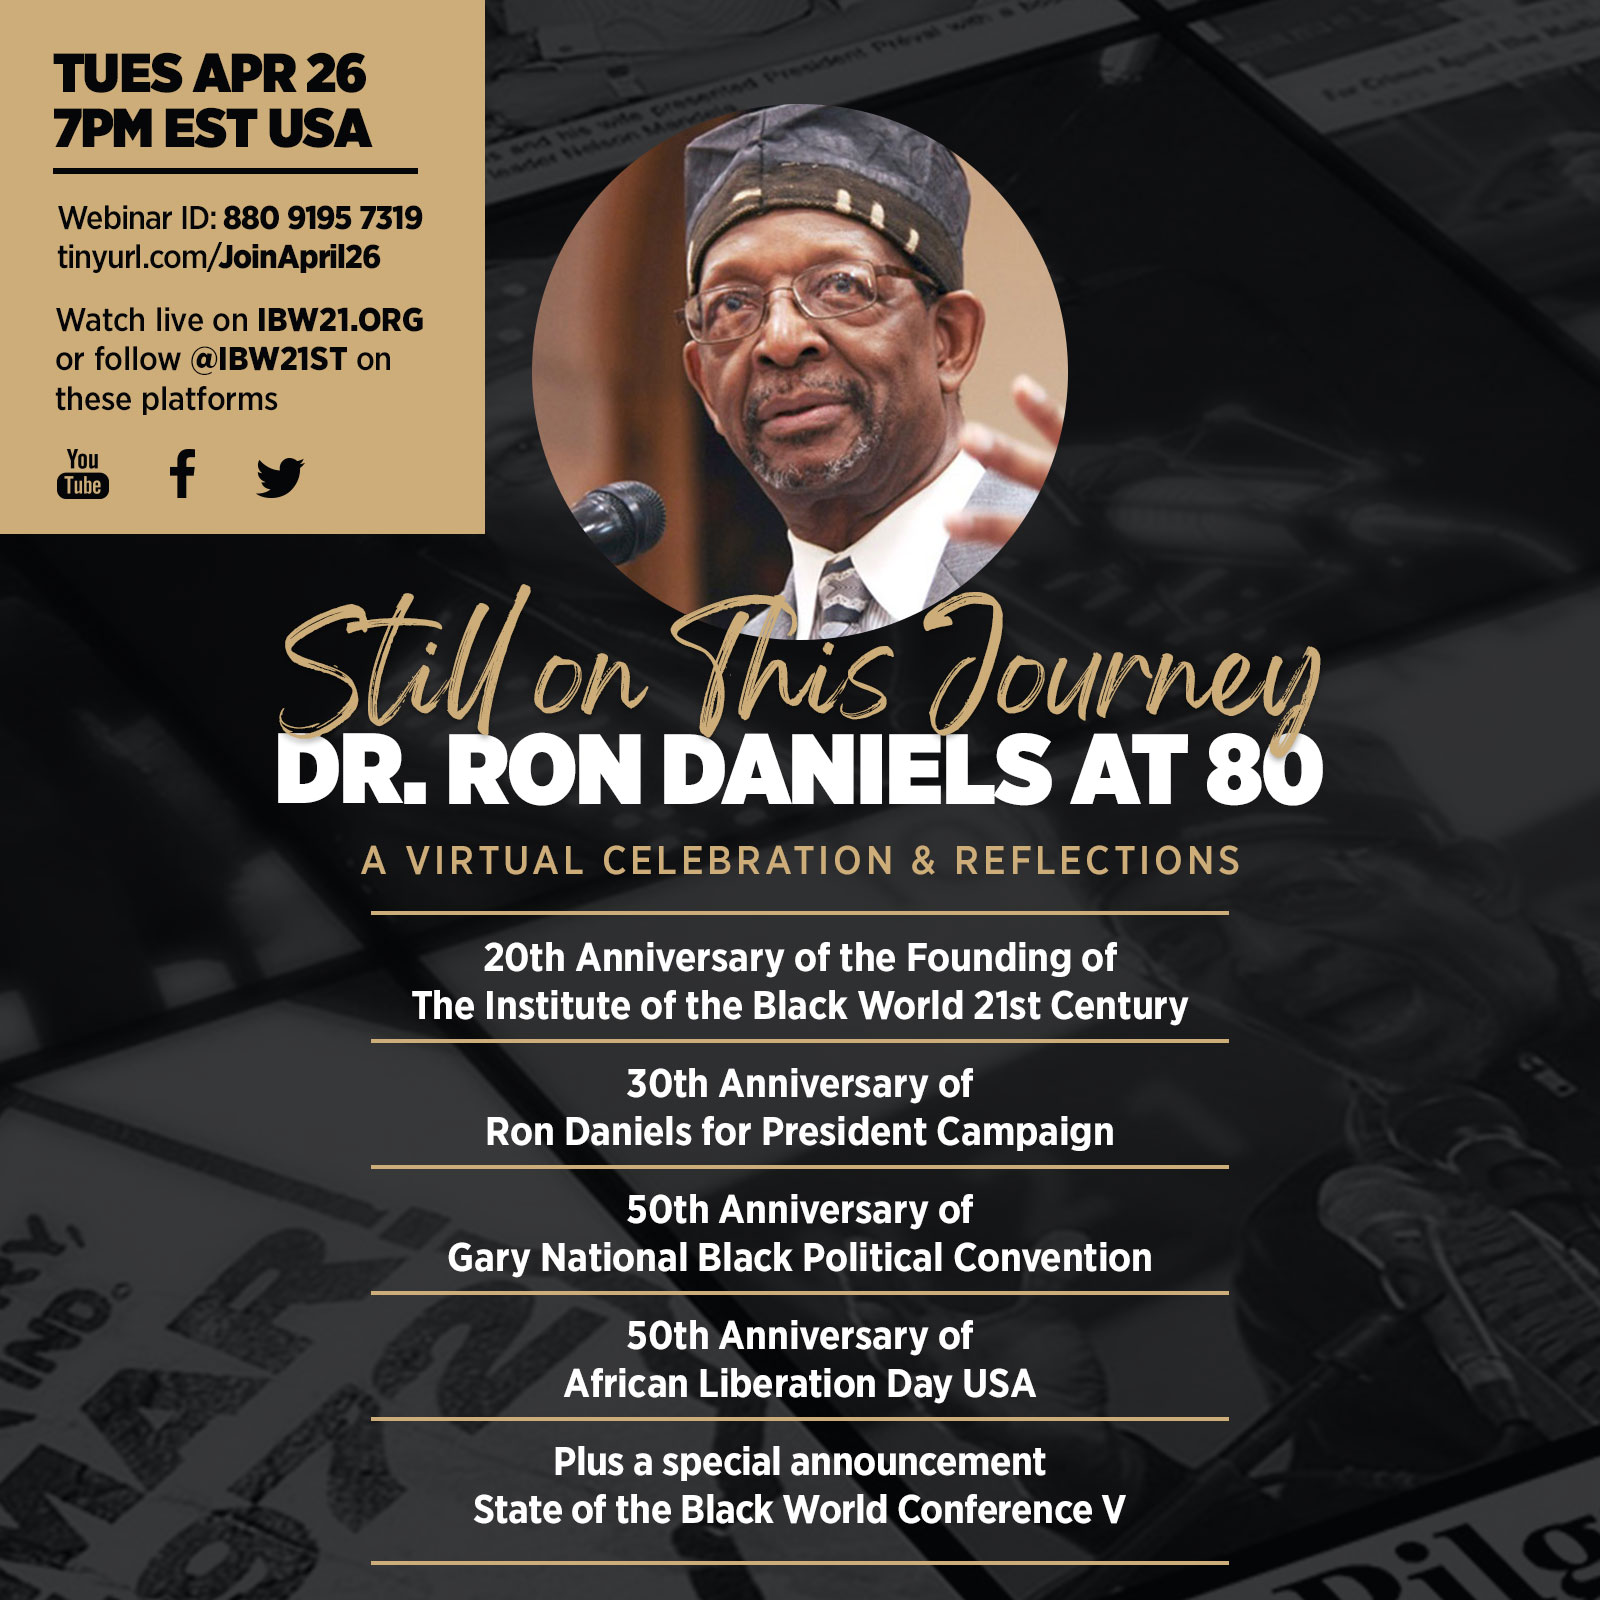 Tuesday, April 26, 2022— A virtual national/international celebration and reflections "Still on This Journey: Dr. Ron Daniels at 80".